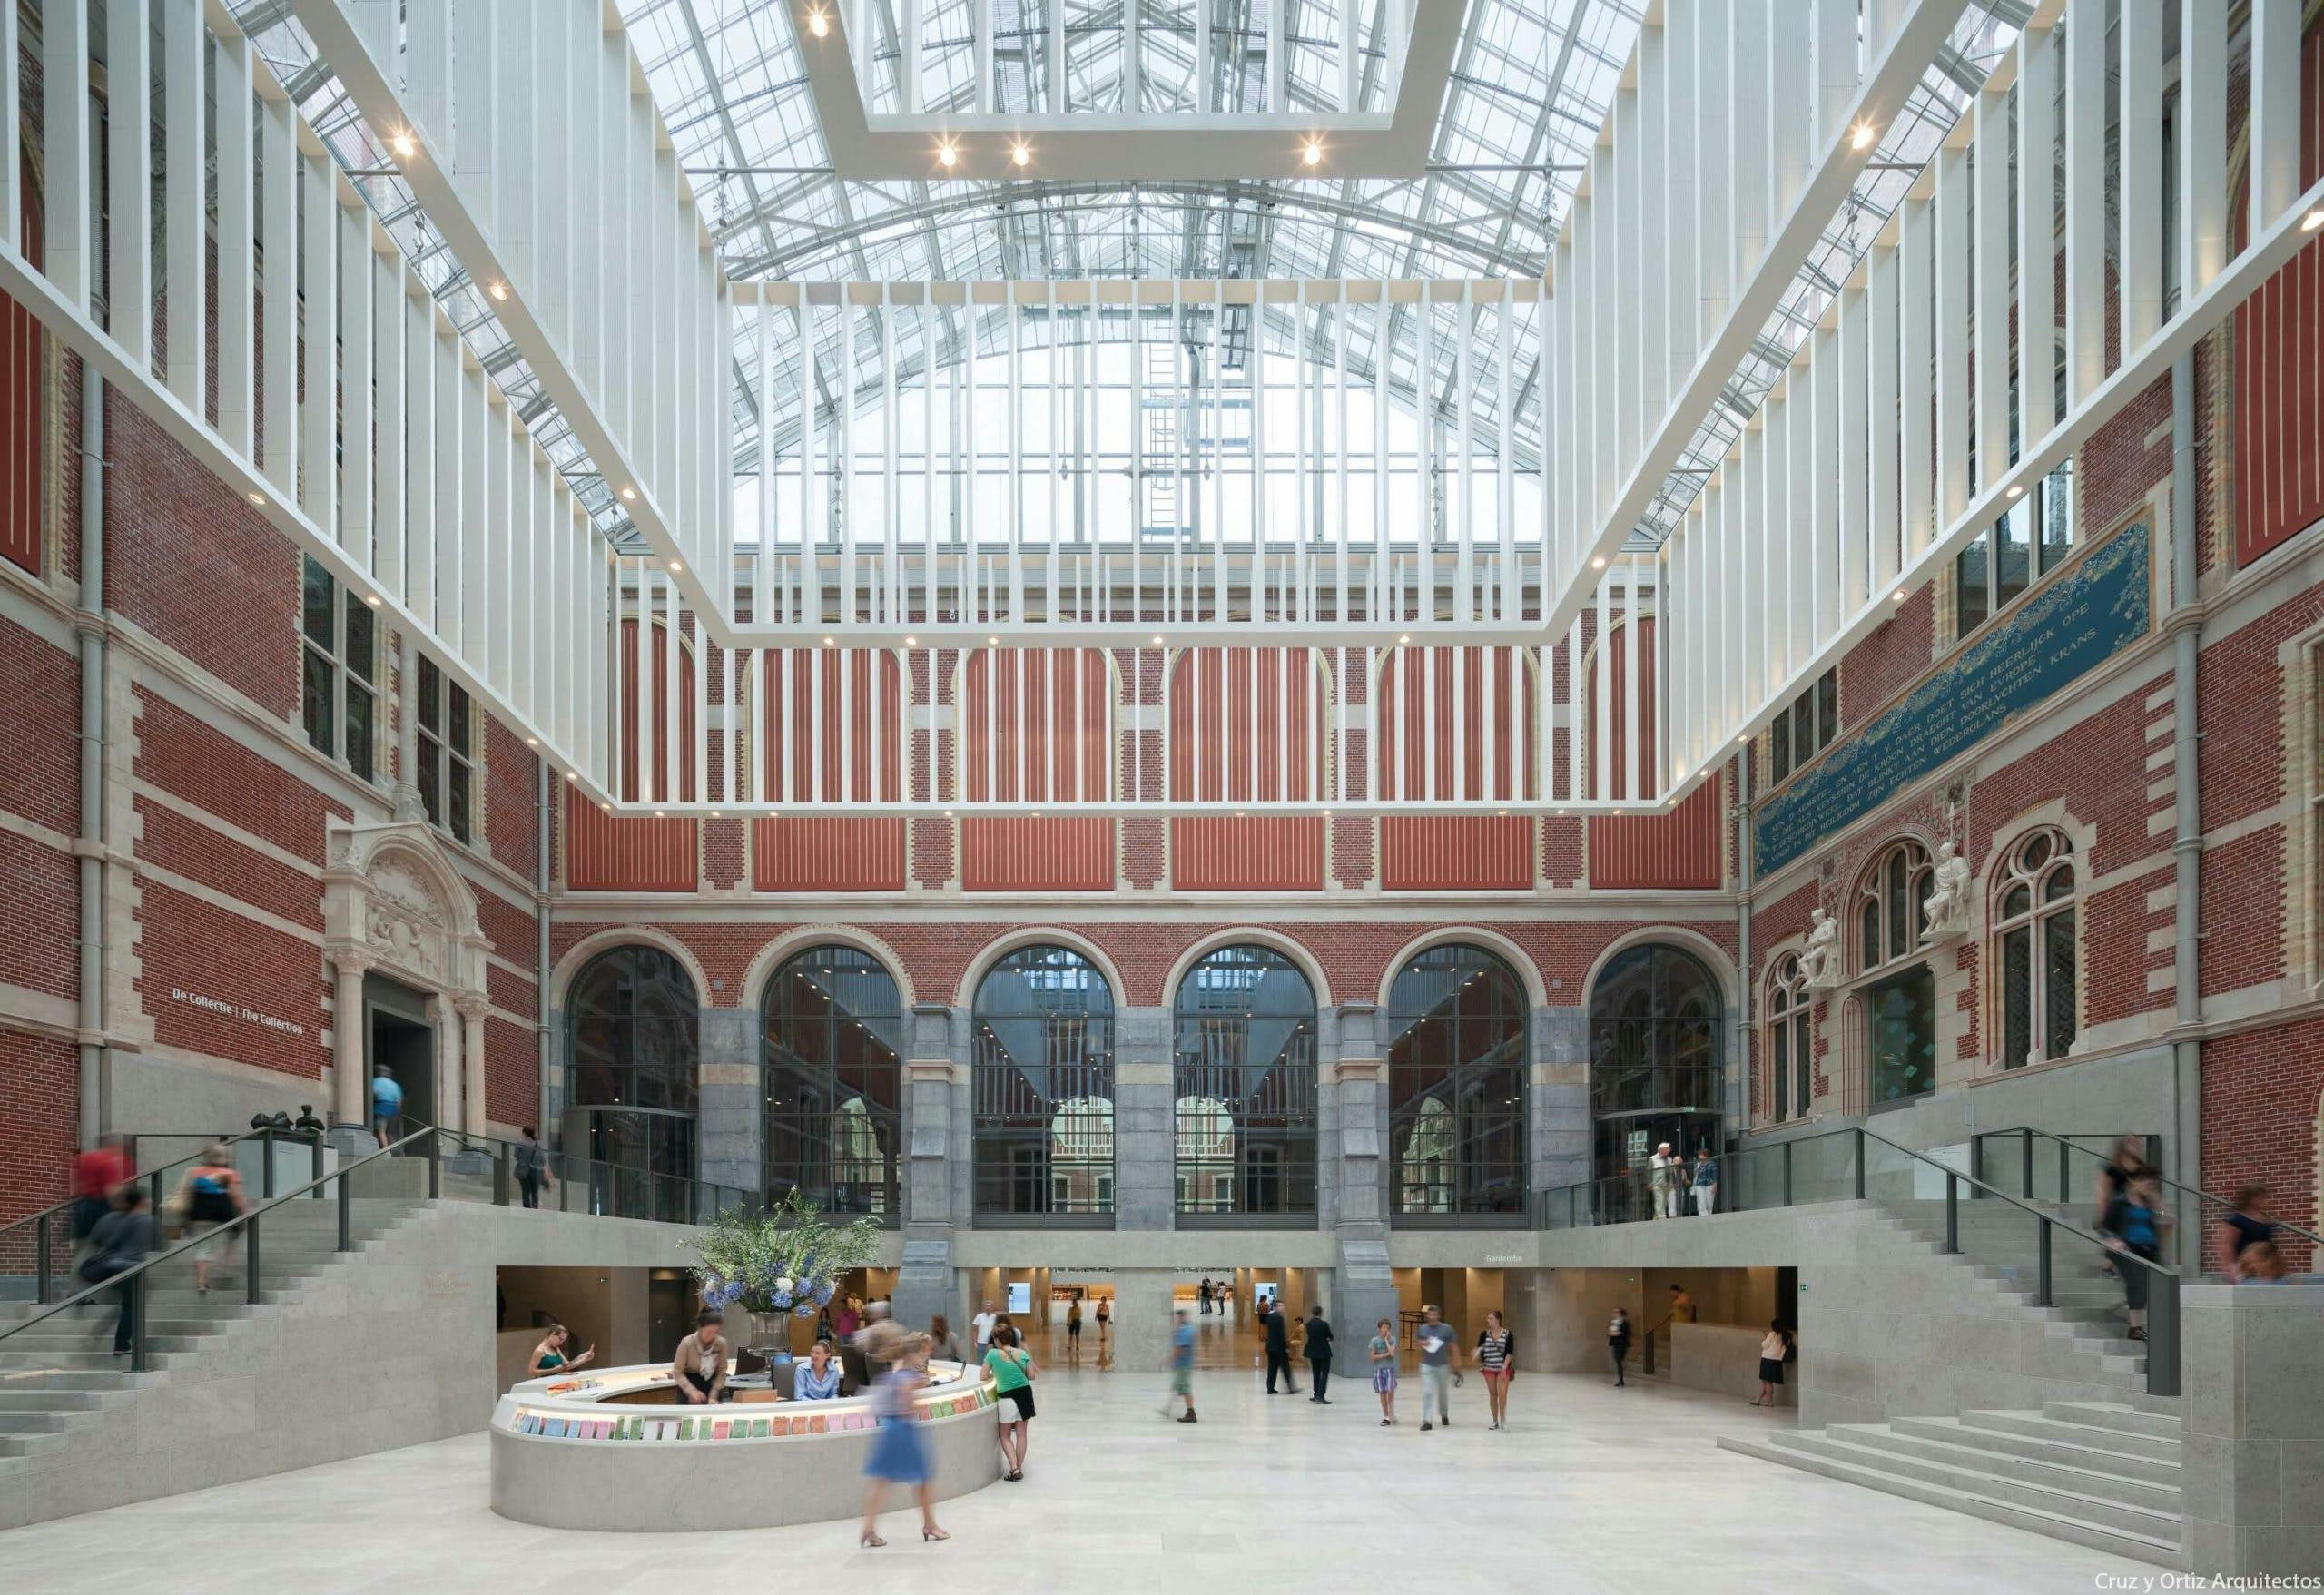 Image 36 of Rijksmuseum Renovation Cruz y Ortiz 1 scaled 1 in The best contemporary architecture in Amsterdam, now in C-guide - Cosentino